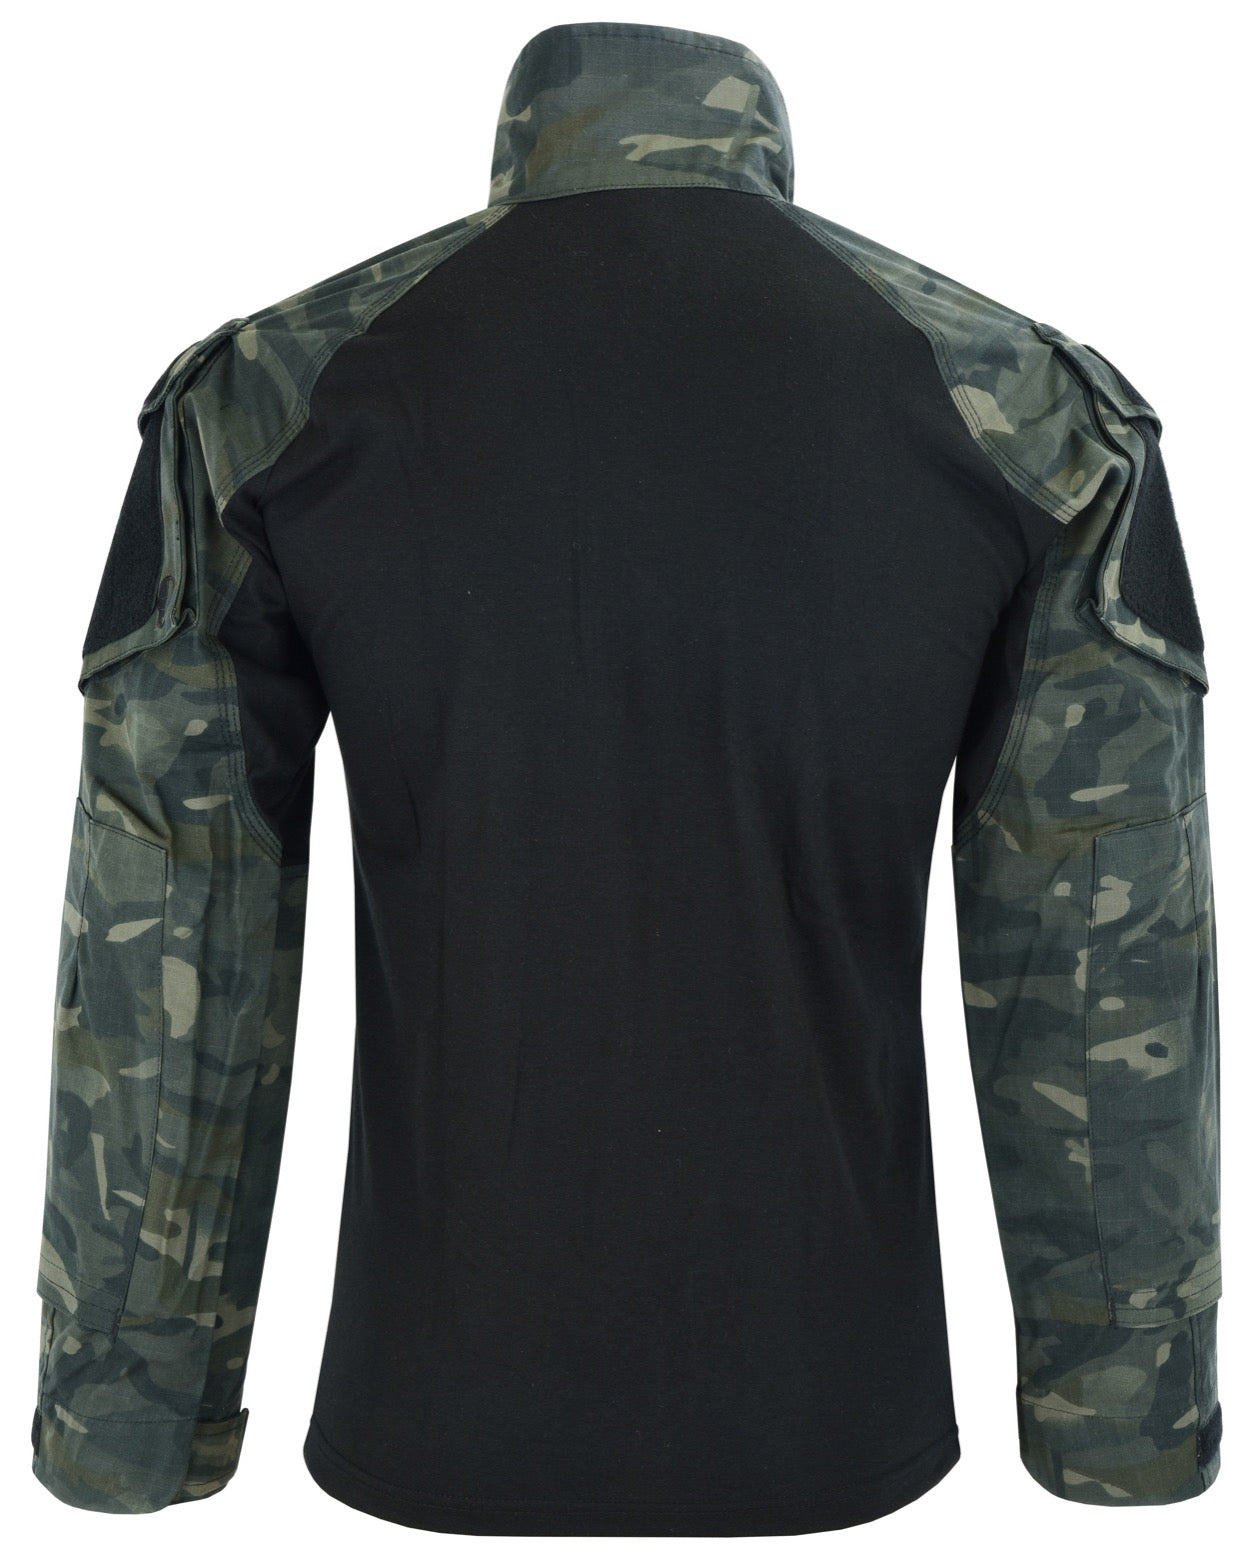 Tactical Zone HYBRID TACTICAL SHIRT IS A PERFECT COMBAT SHIRT Colour  UTP-DarkNight Back